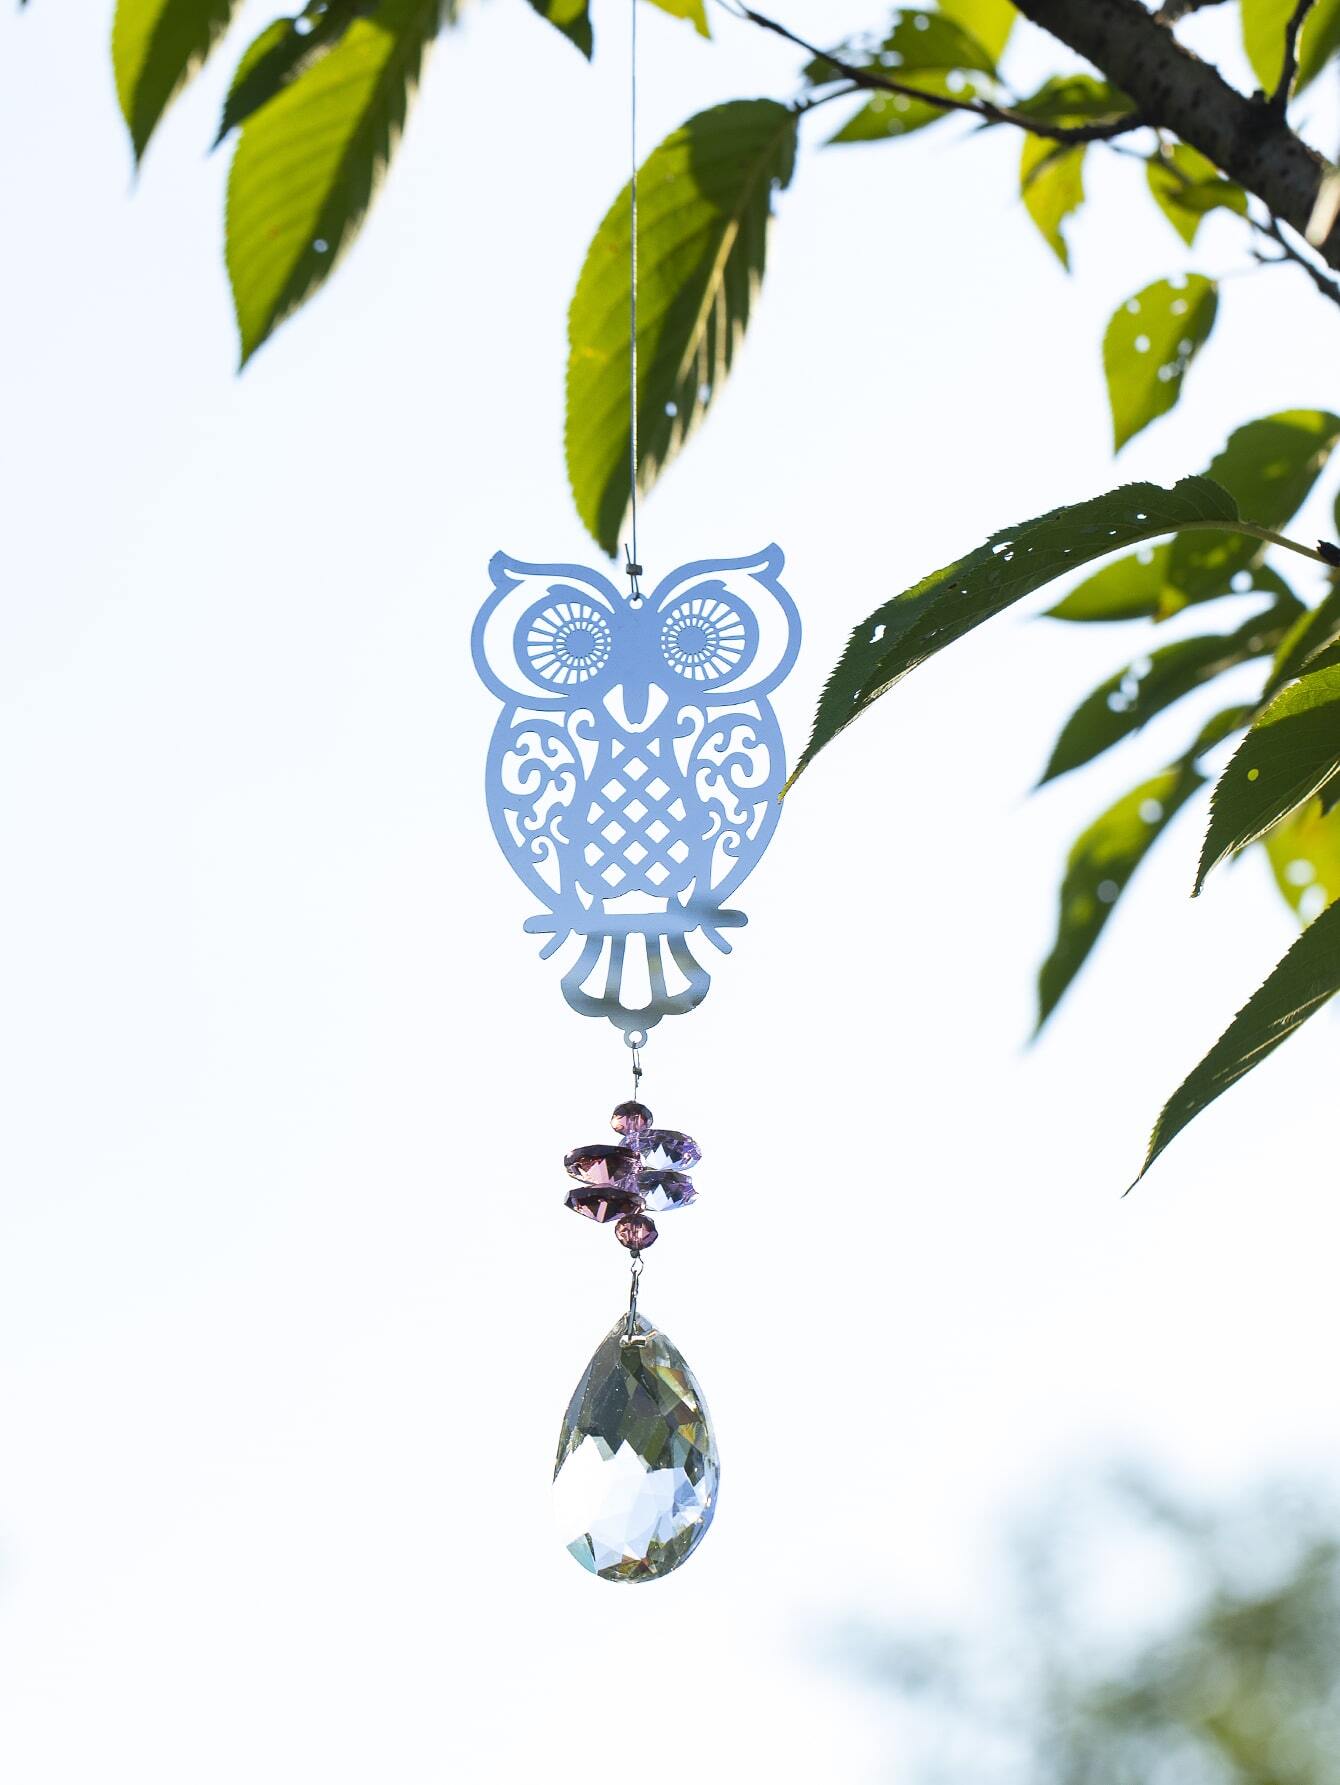 1pc Owl & Water Drop Decor Hanging Plant Protector